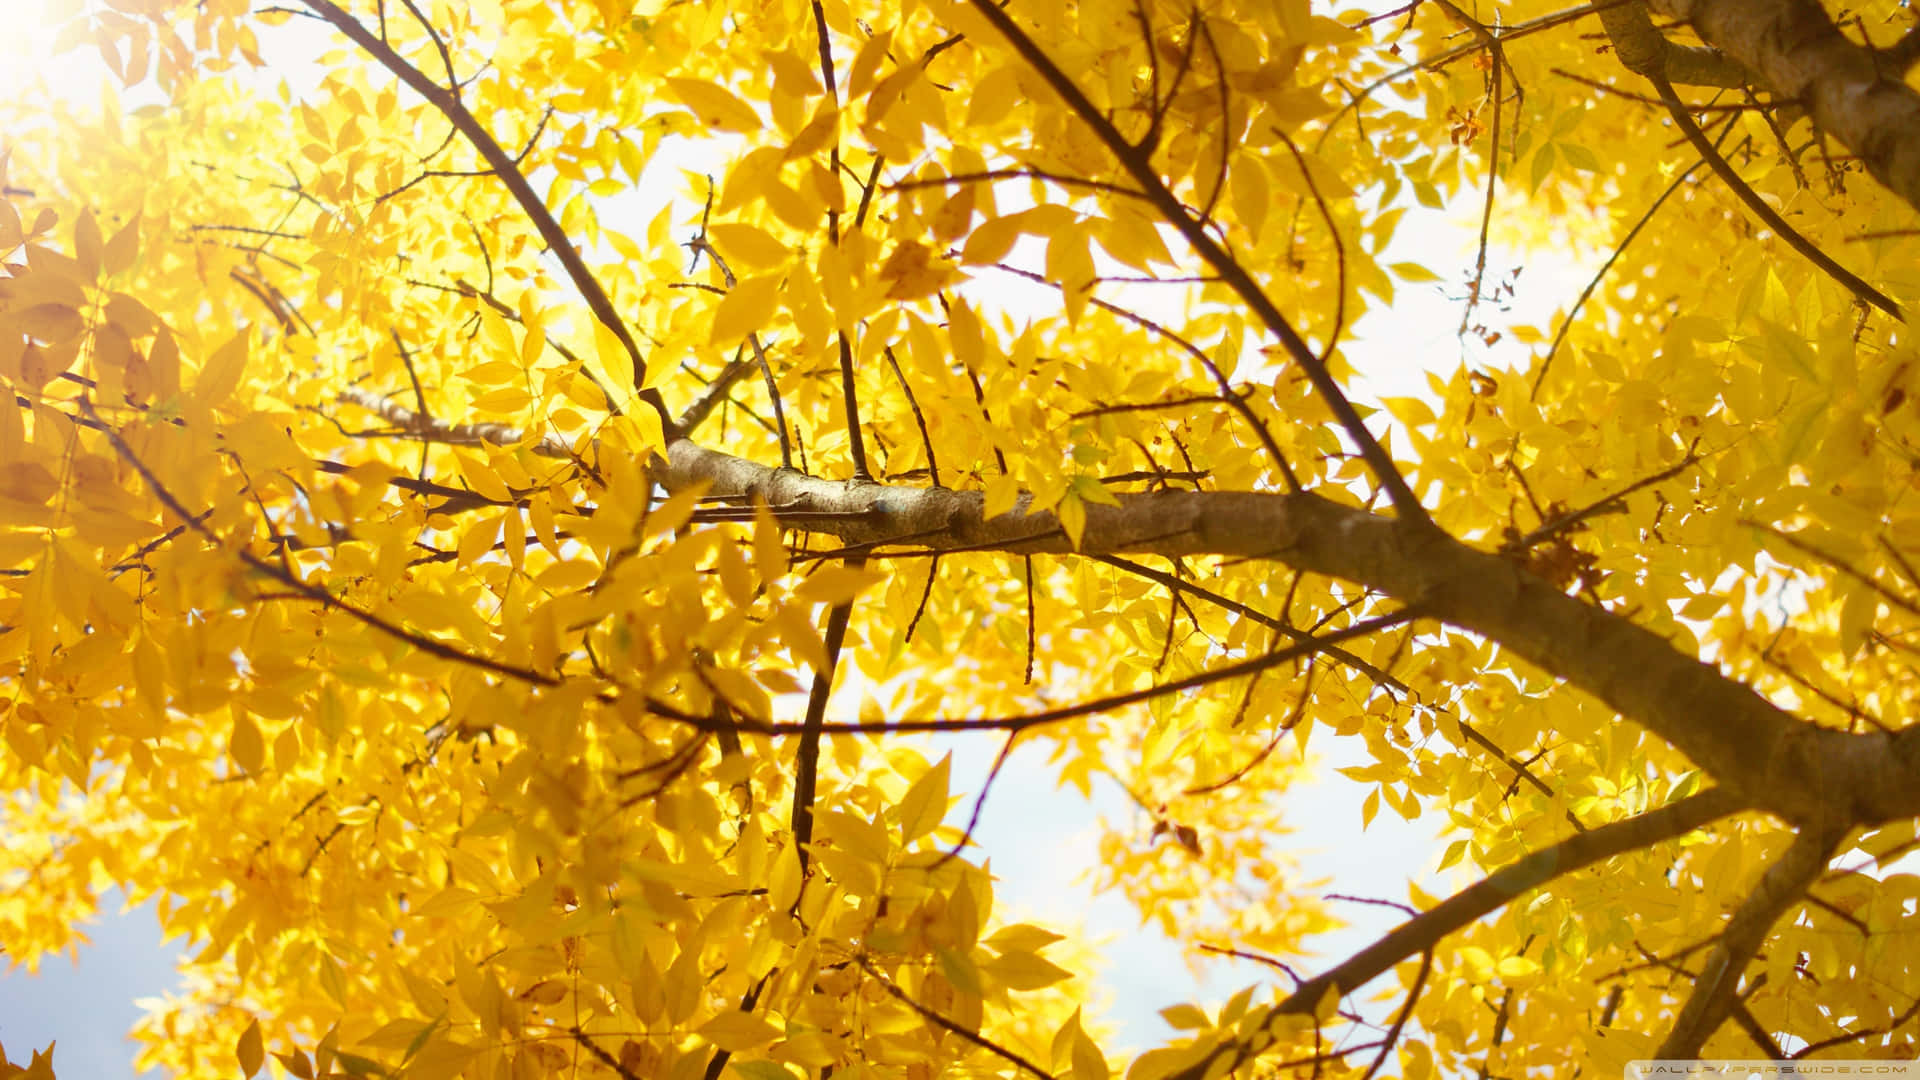 Download A Yellow Tree With Leaves In The Sunlight Wallpaper